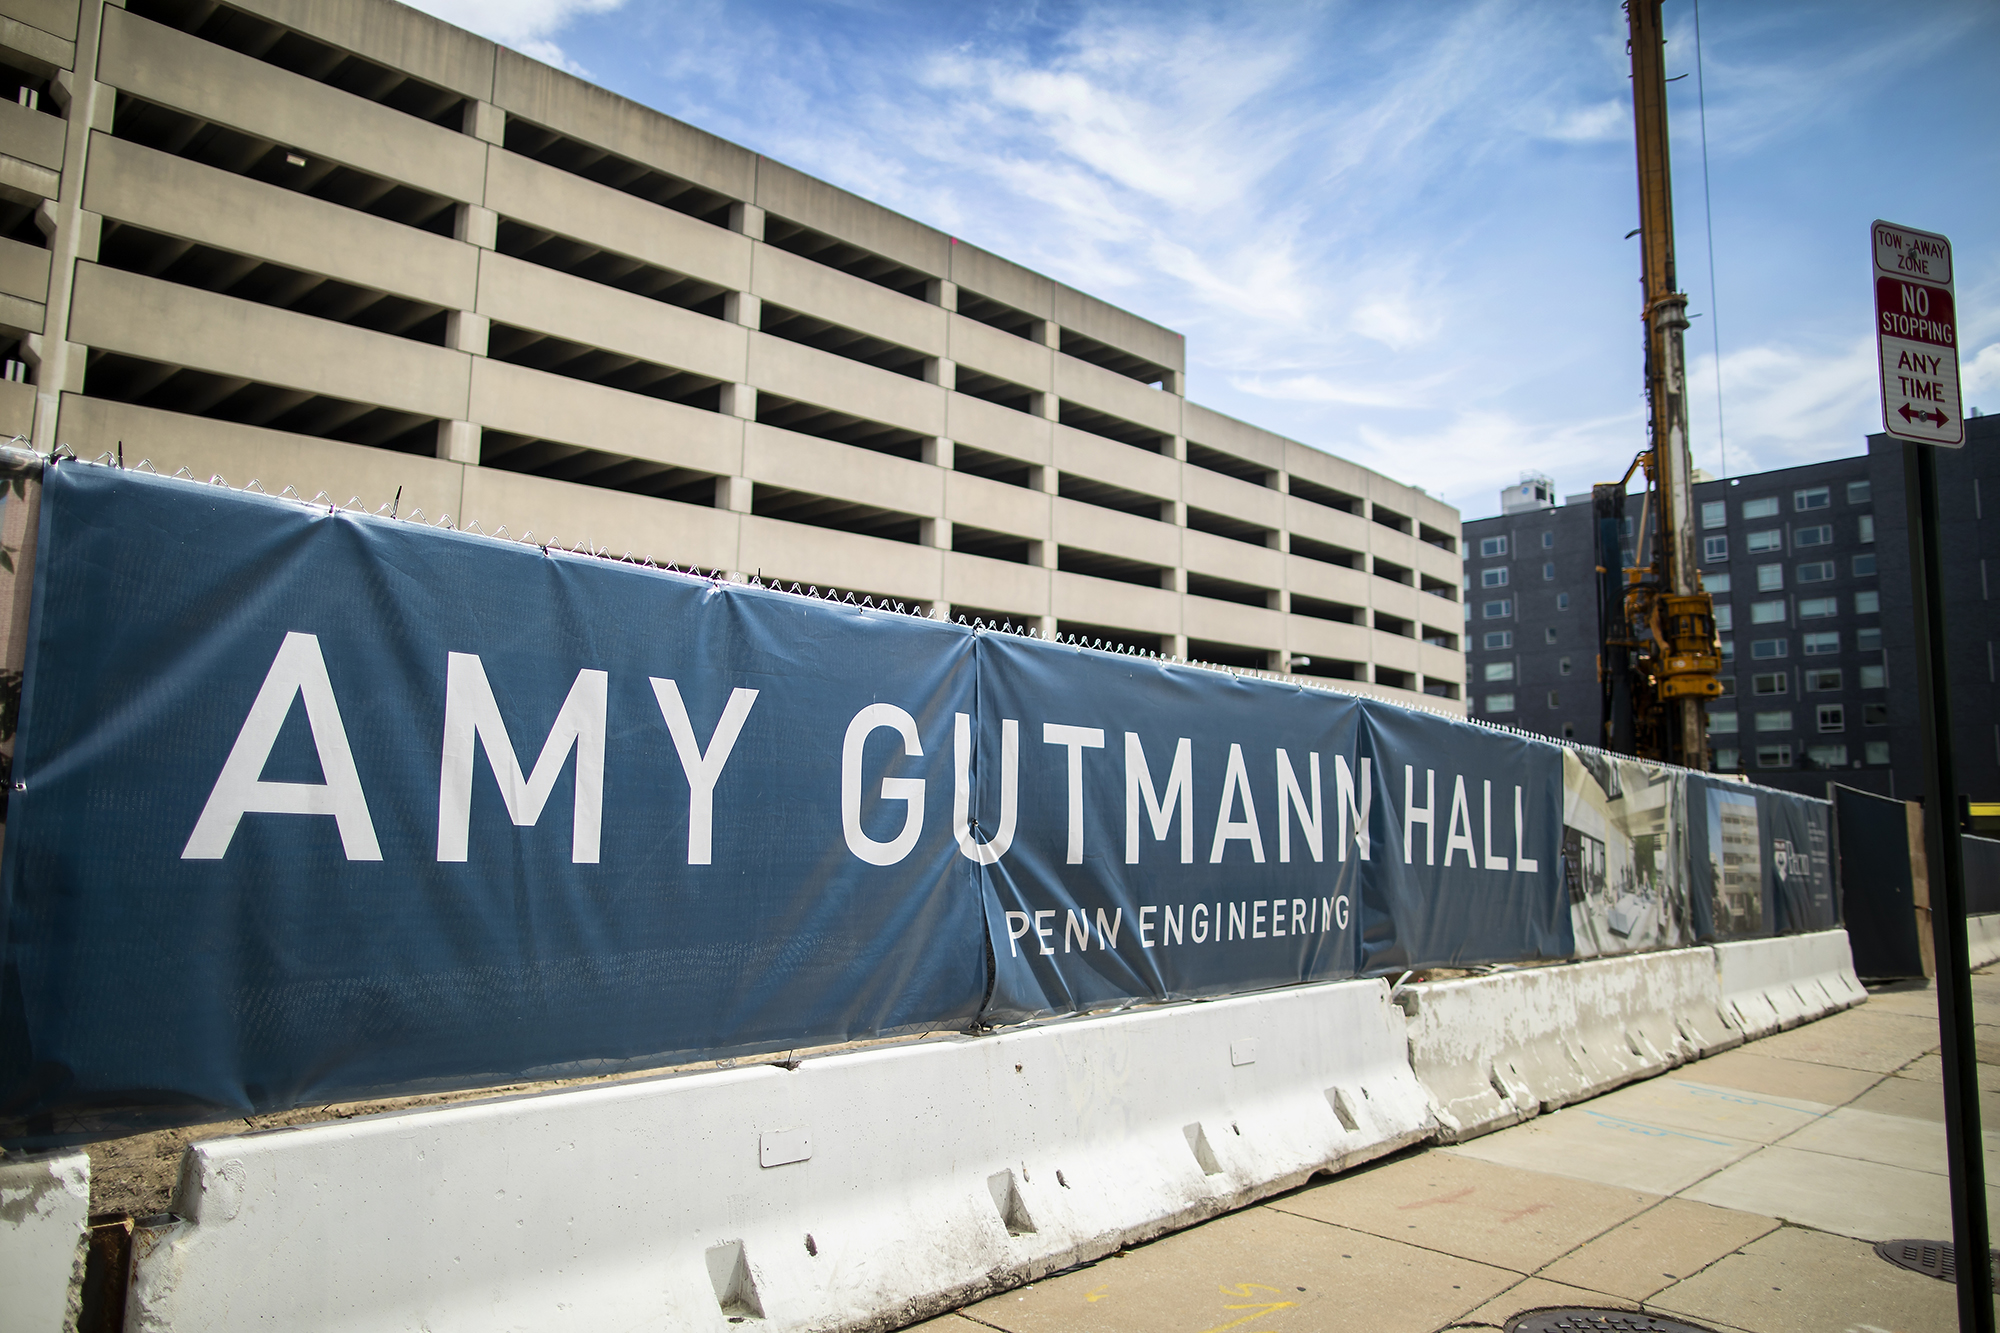 Construction site with a banner on a sidewalk barrier that reads AMY GUTMANN HALL.